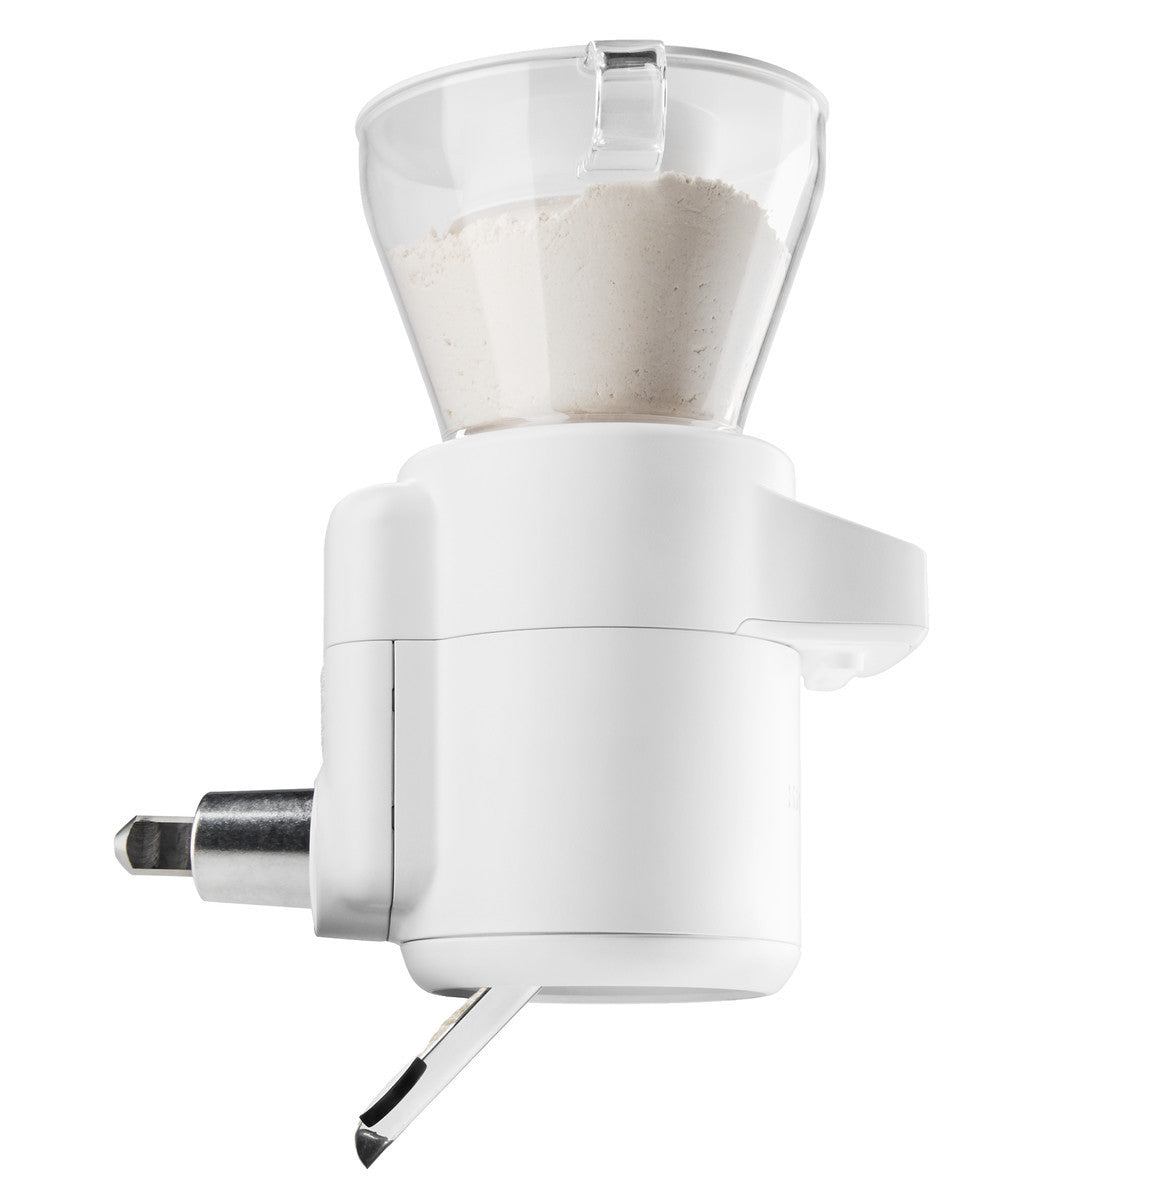 Sifter- Stand Mixer Attachment